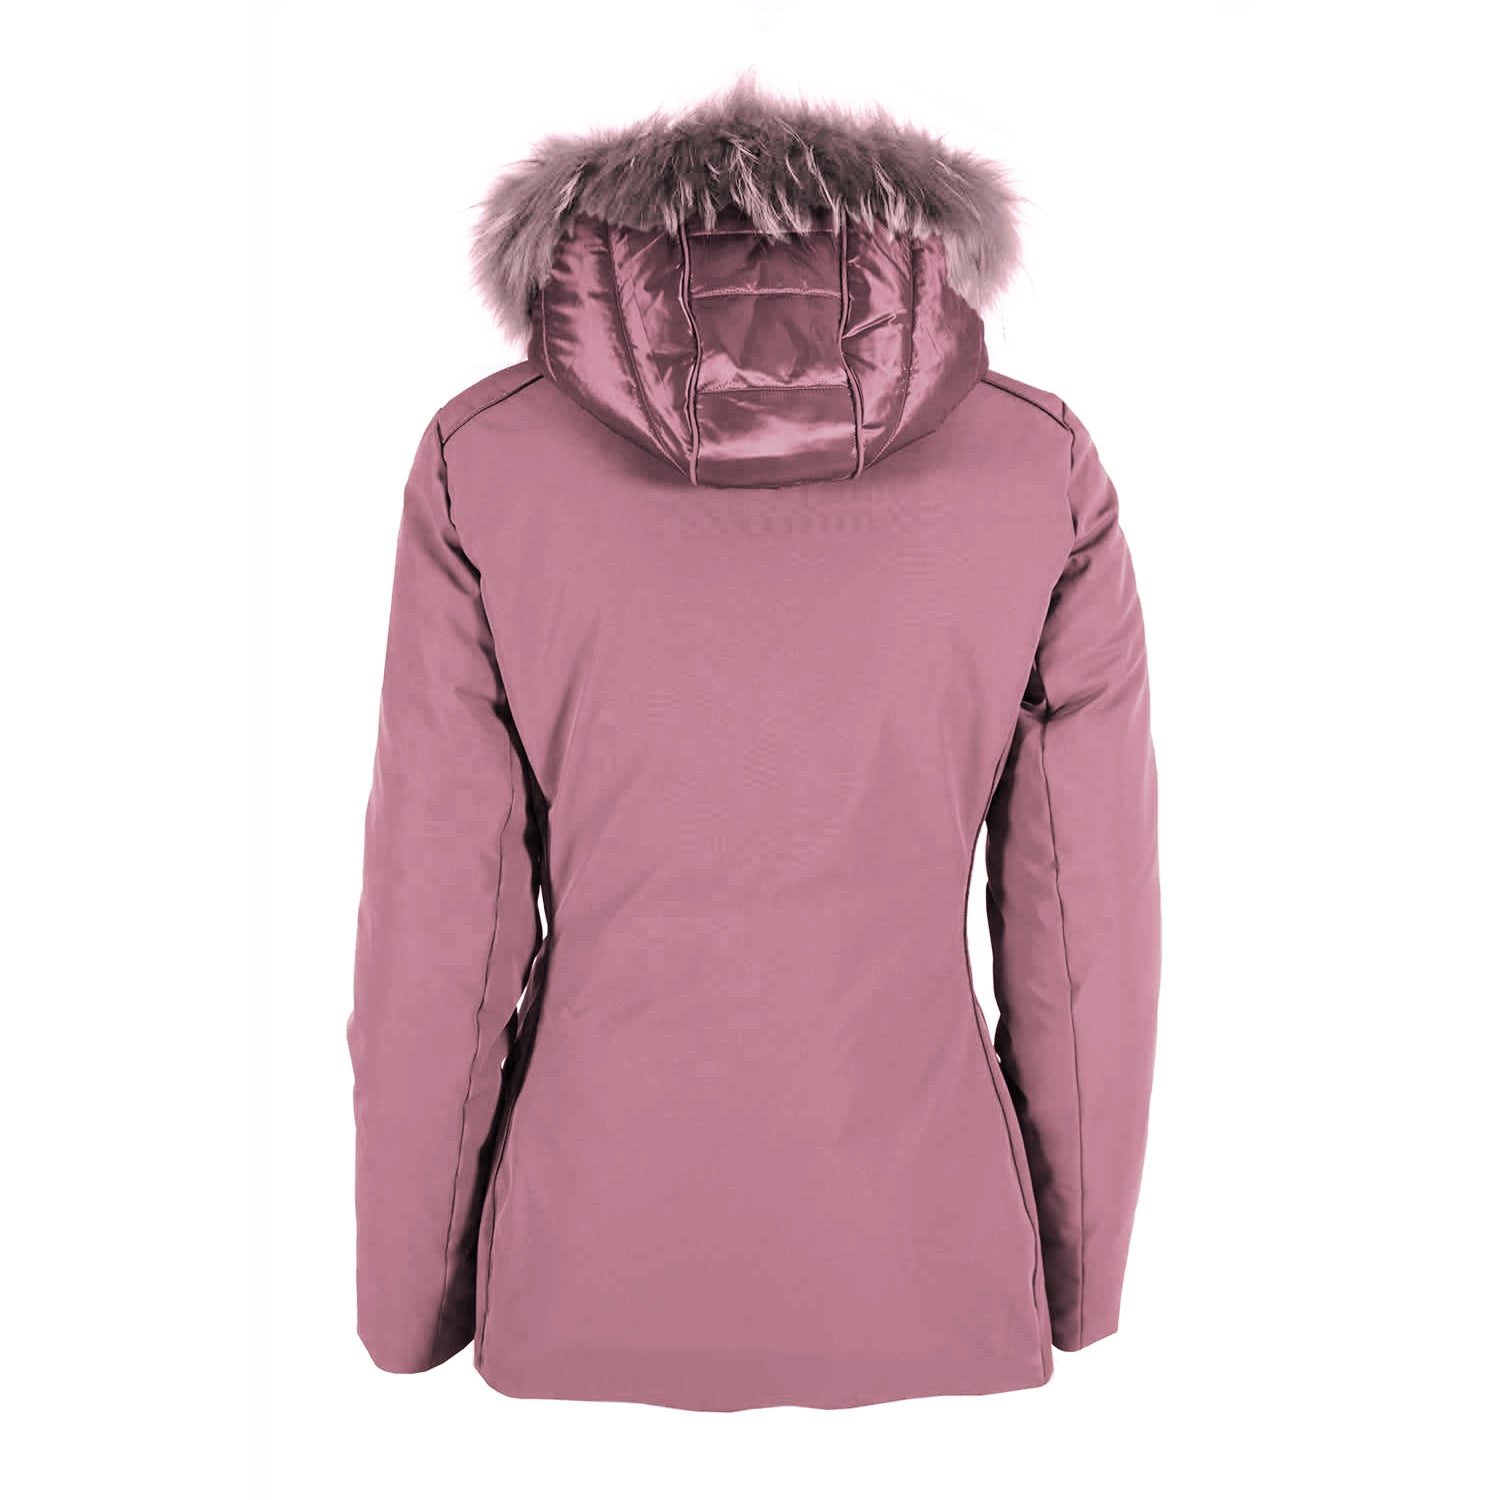 Yes Zee Pink Polyamide Jackets & Coat - Cicis Boutique